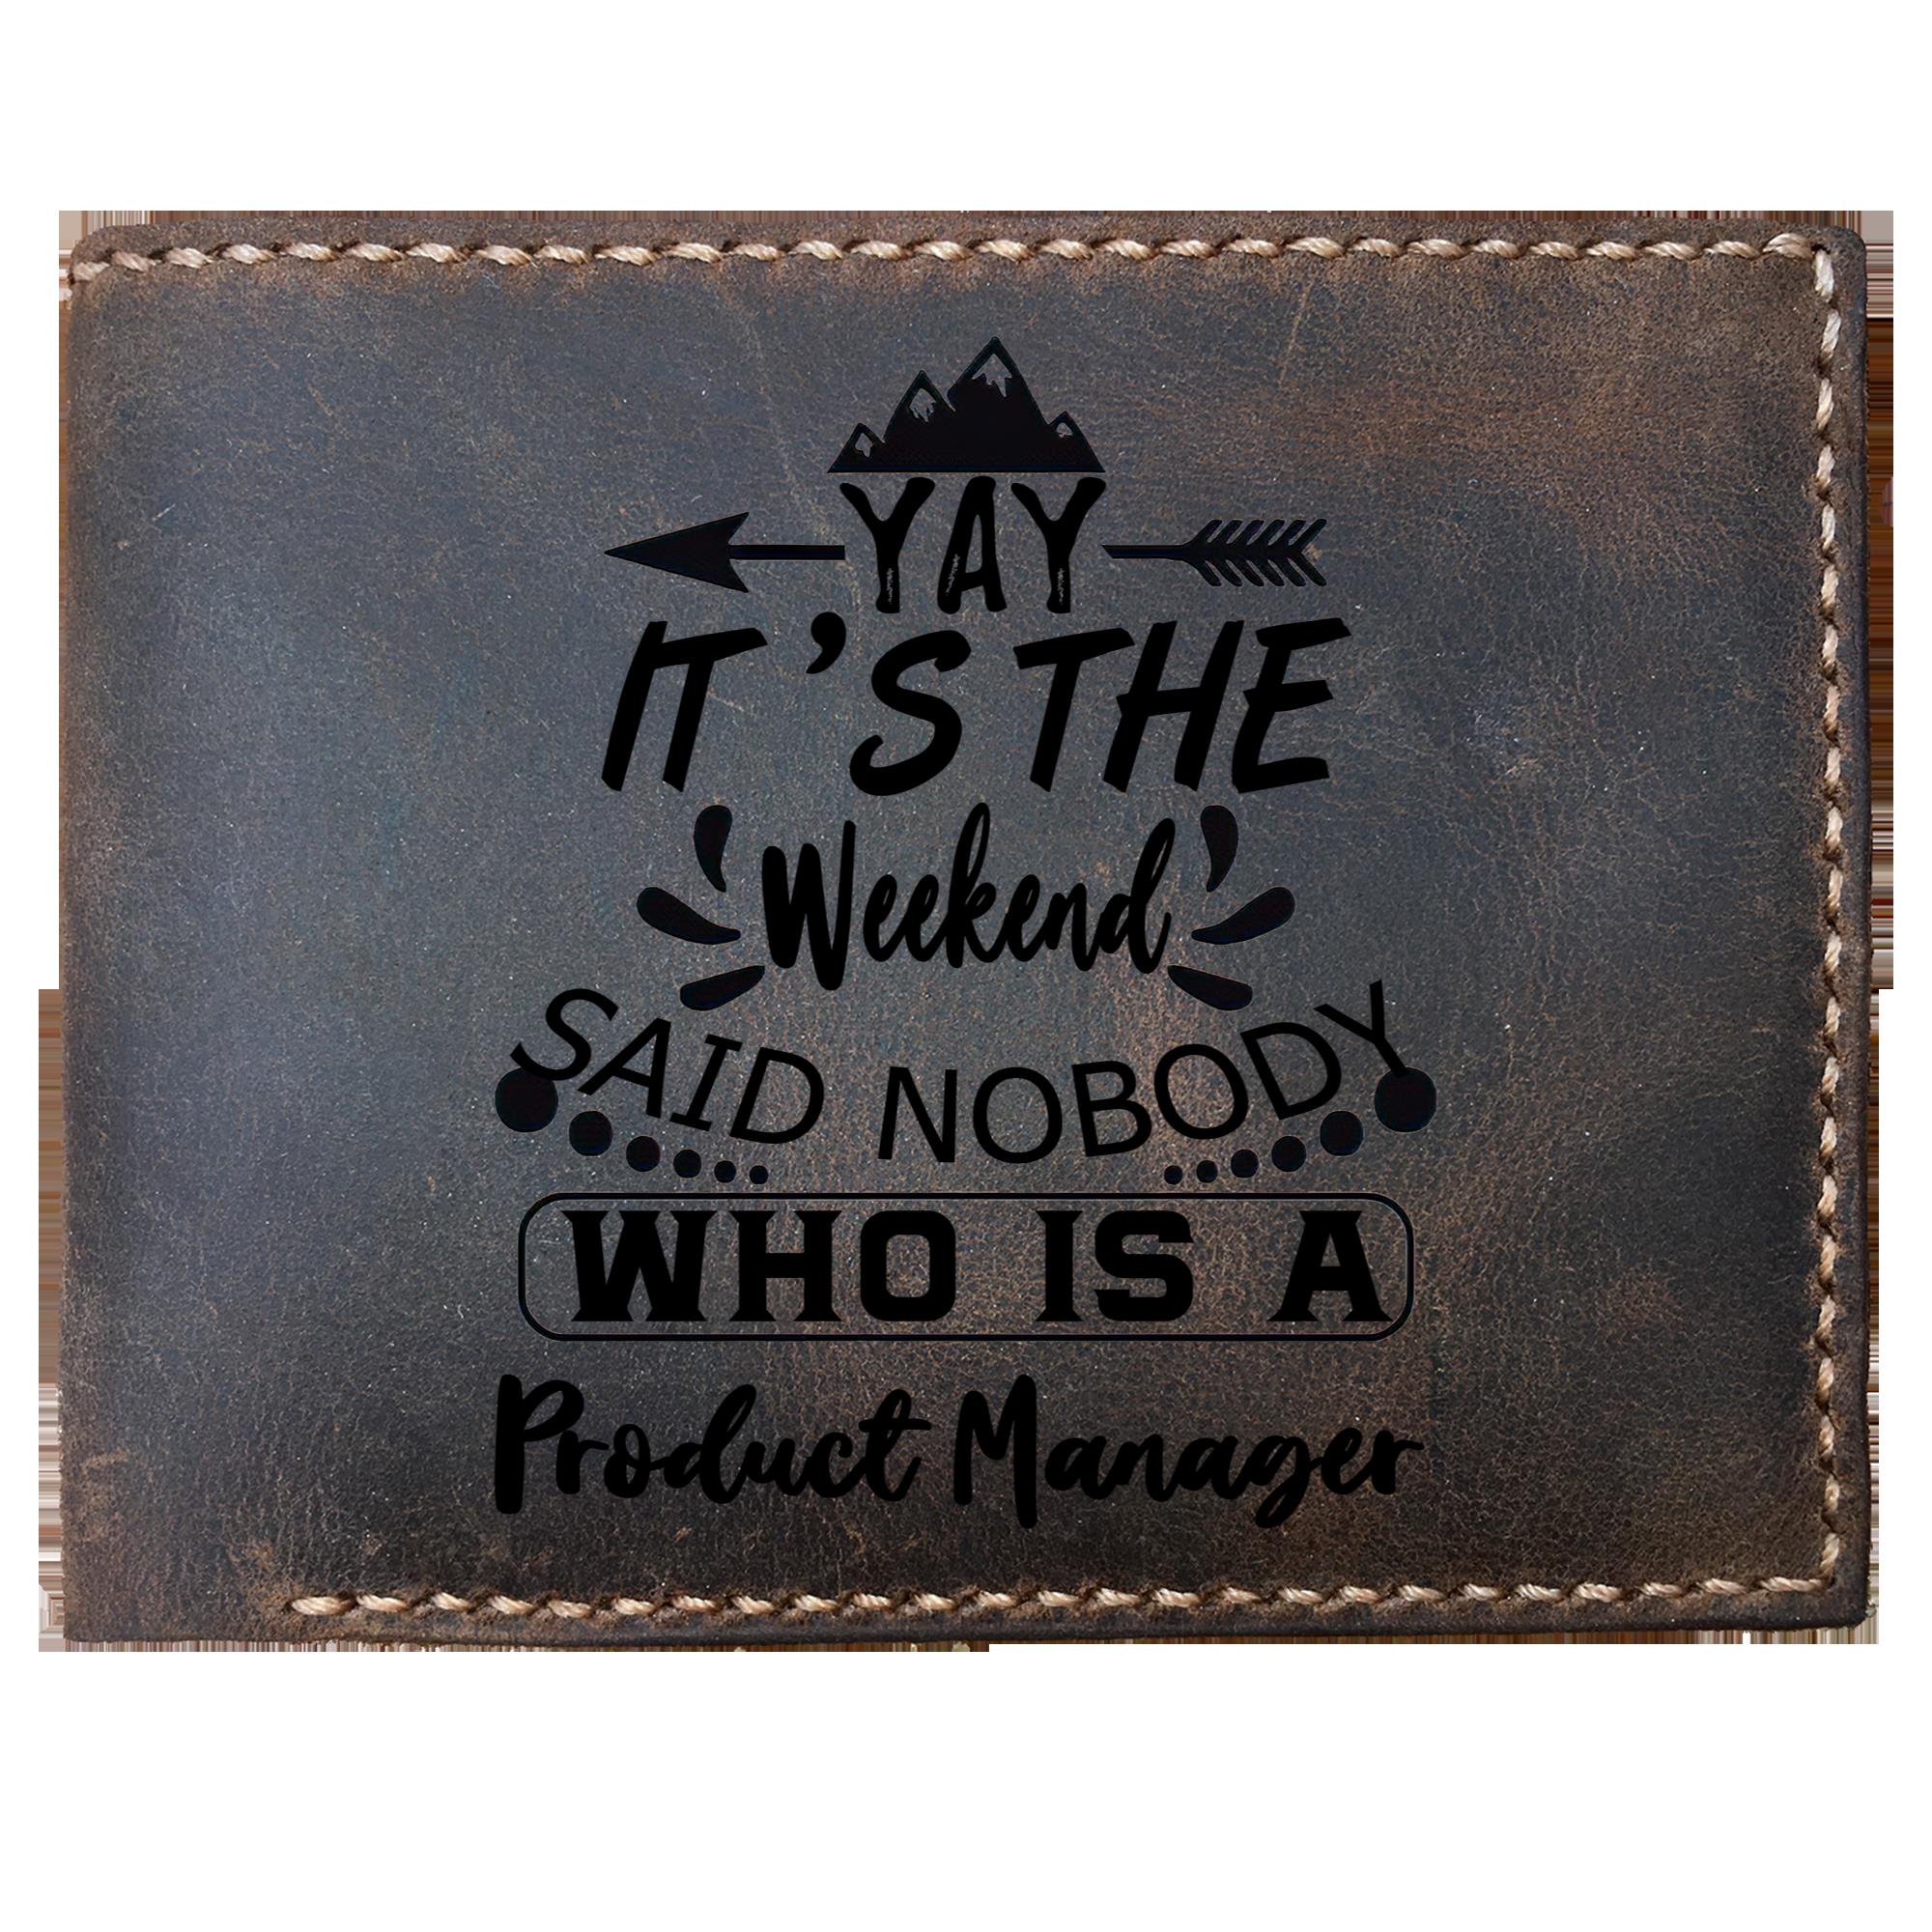 Skitongifts Funny Custom Laser Engraved Bifold Leather Wallet For Men, It's The Weekend Said Nobody Who Is A Product Manager, Father's Day Gifts